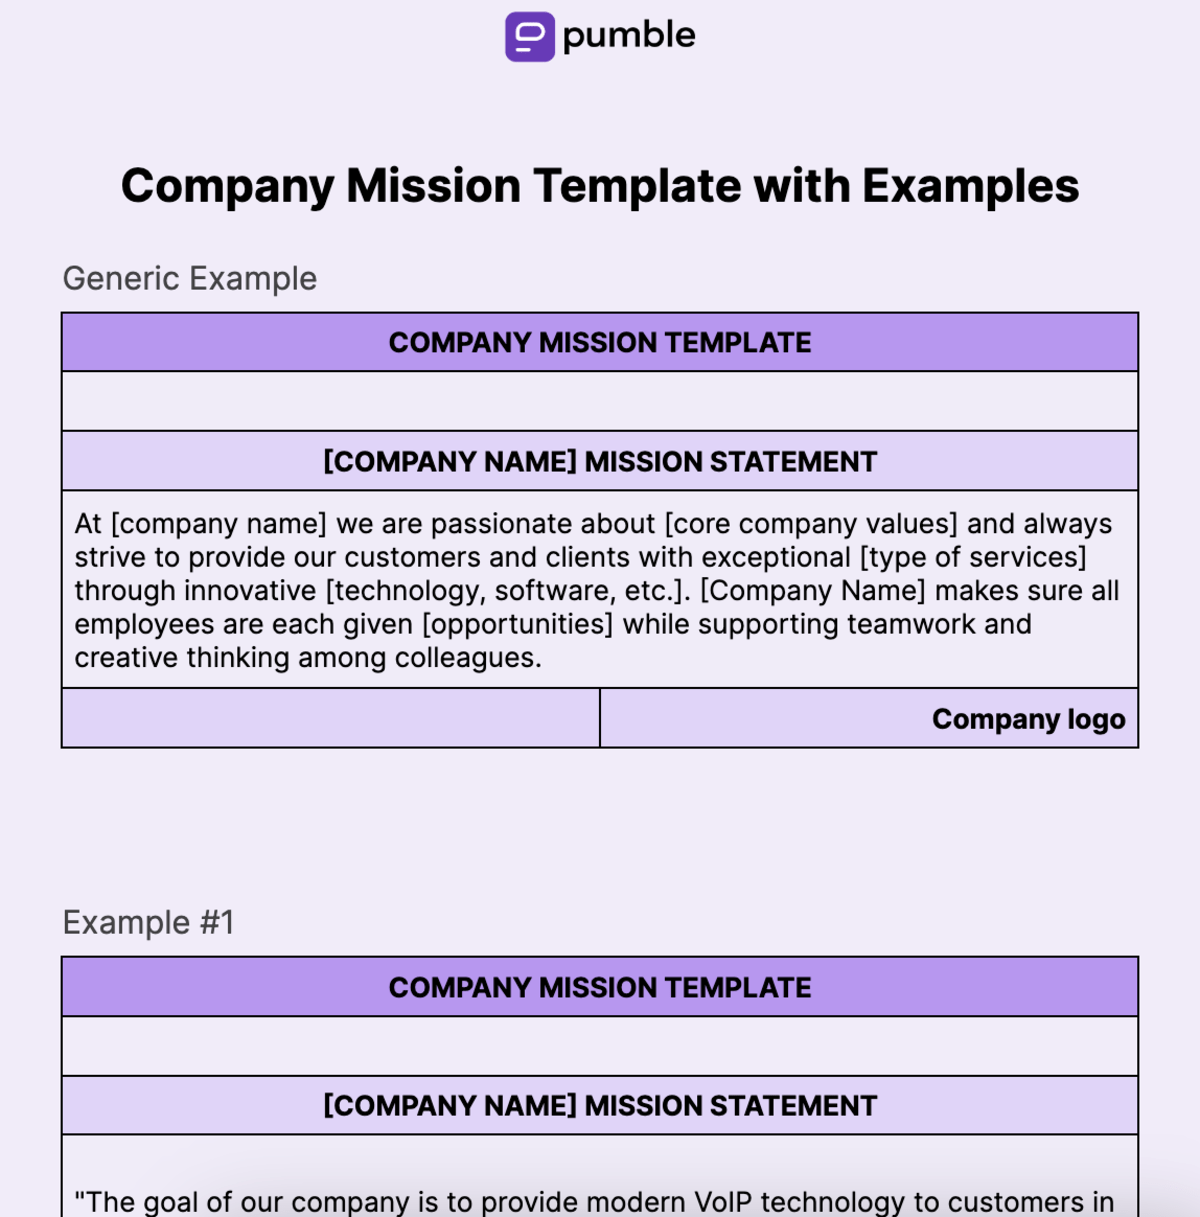 Company Mission Template with Examples